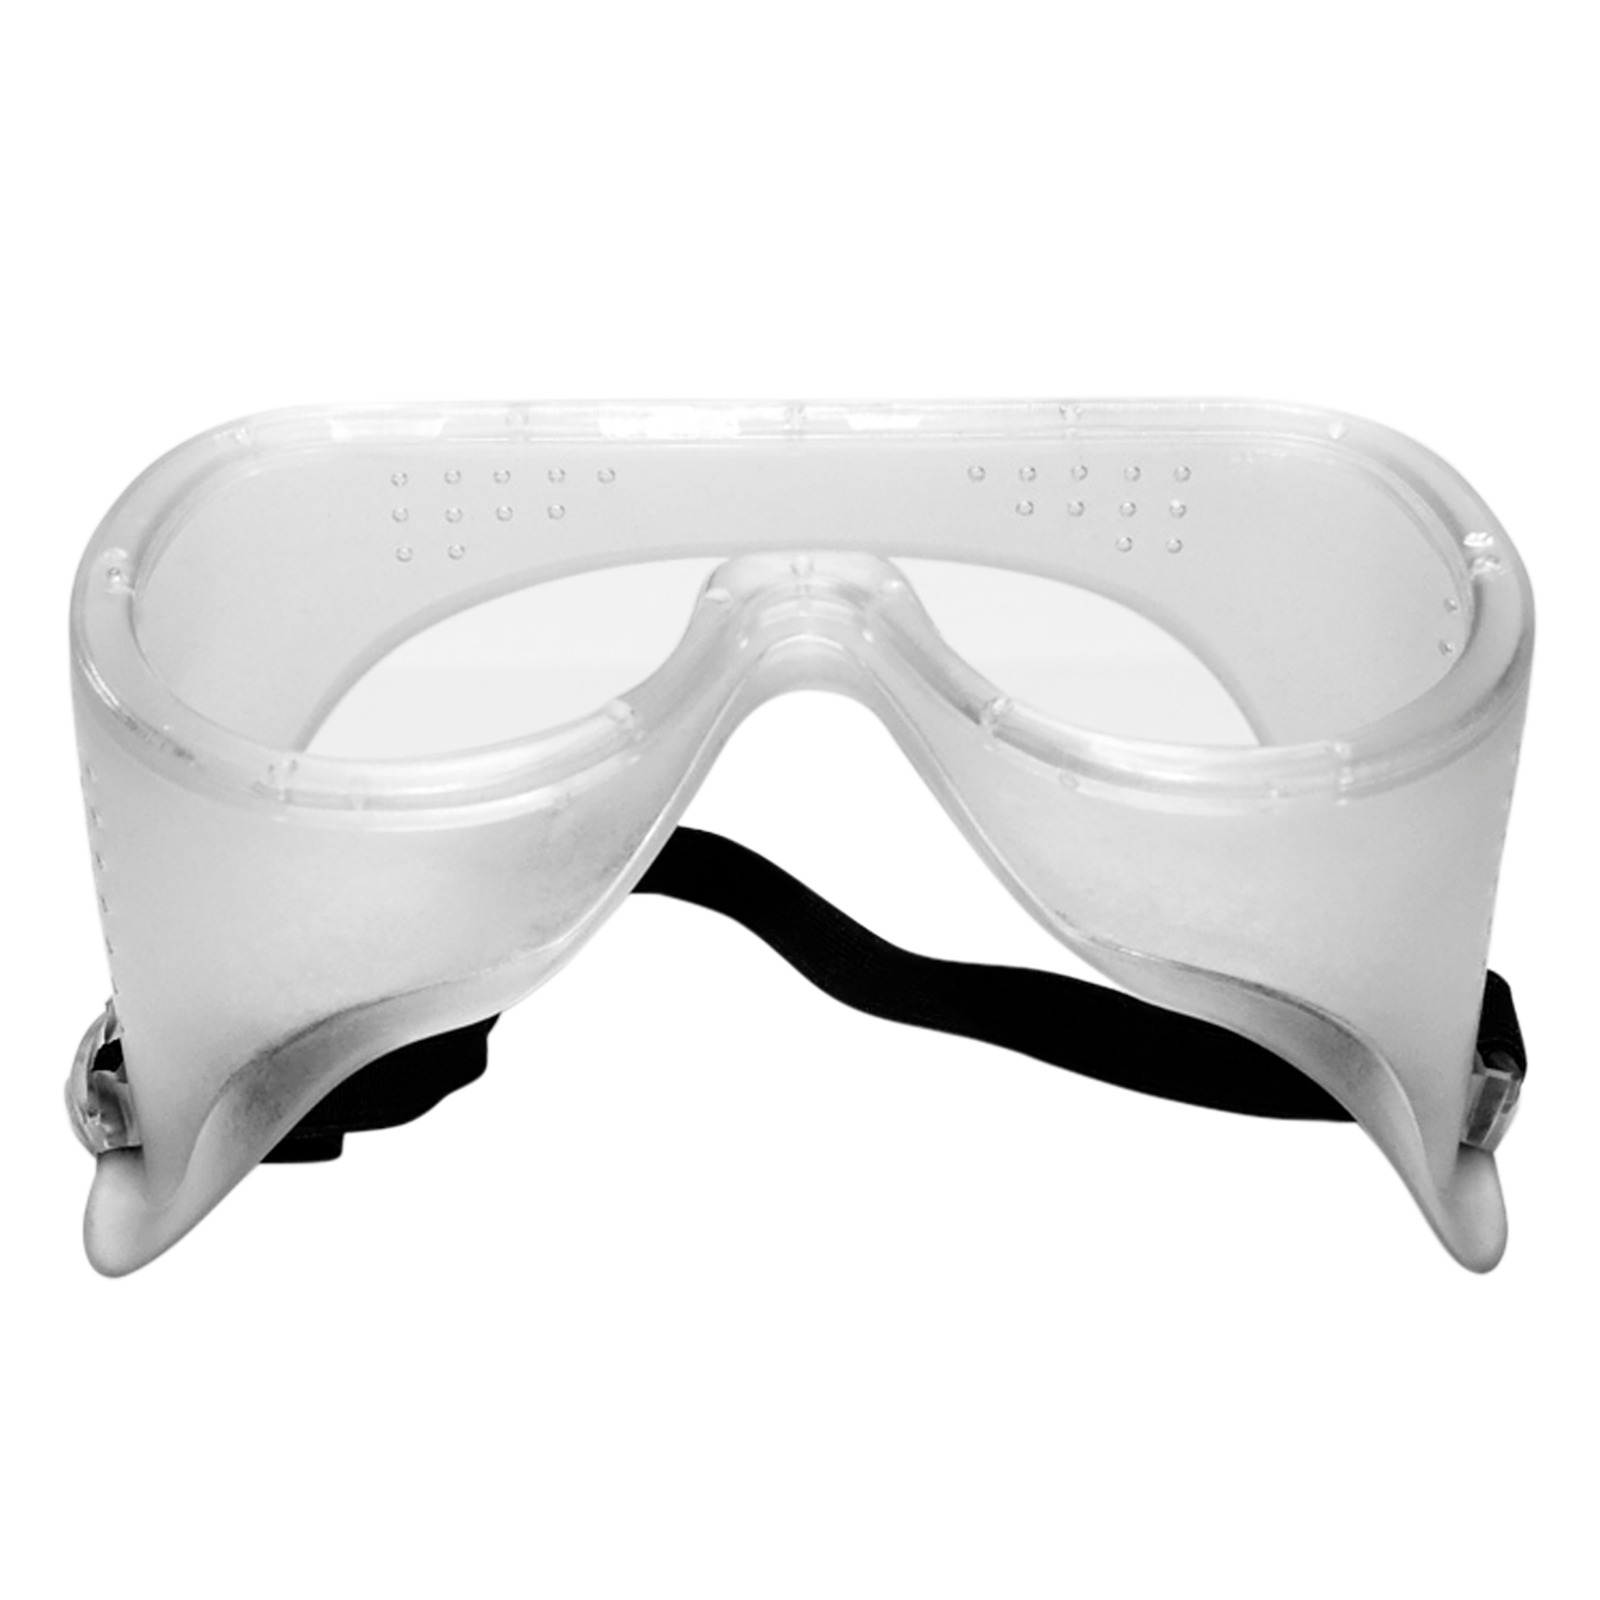 Side view of a JORESTECH safety goggle with vents and elastic head band